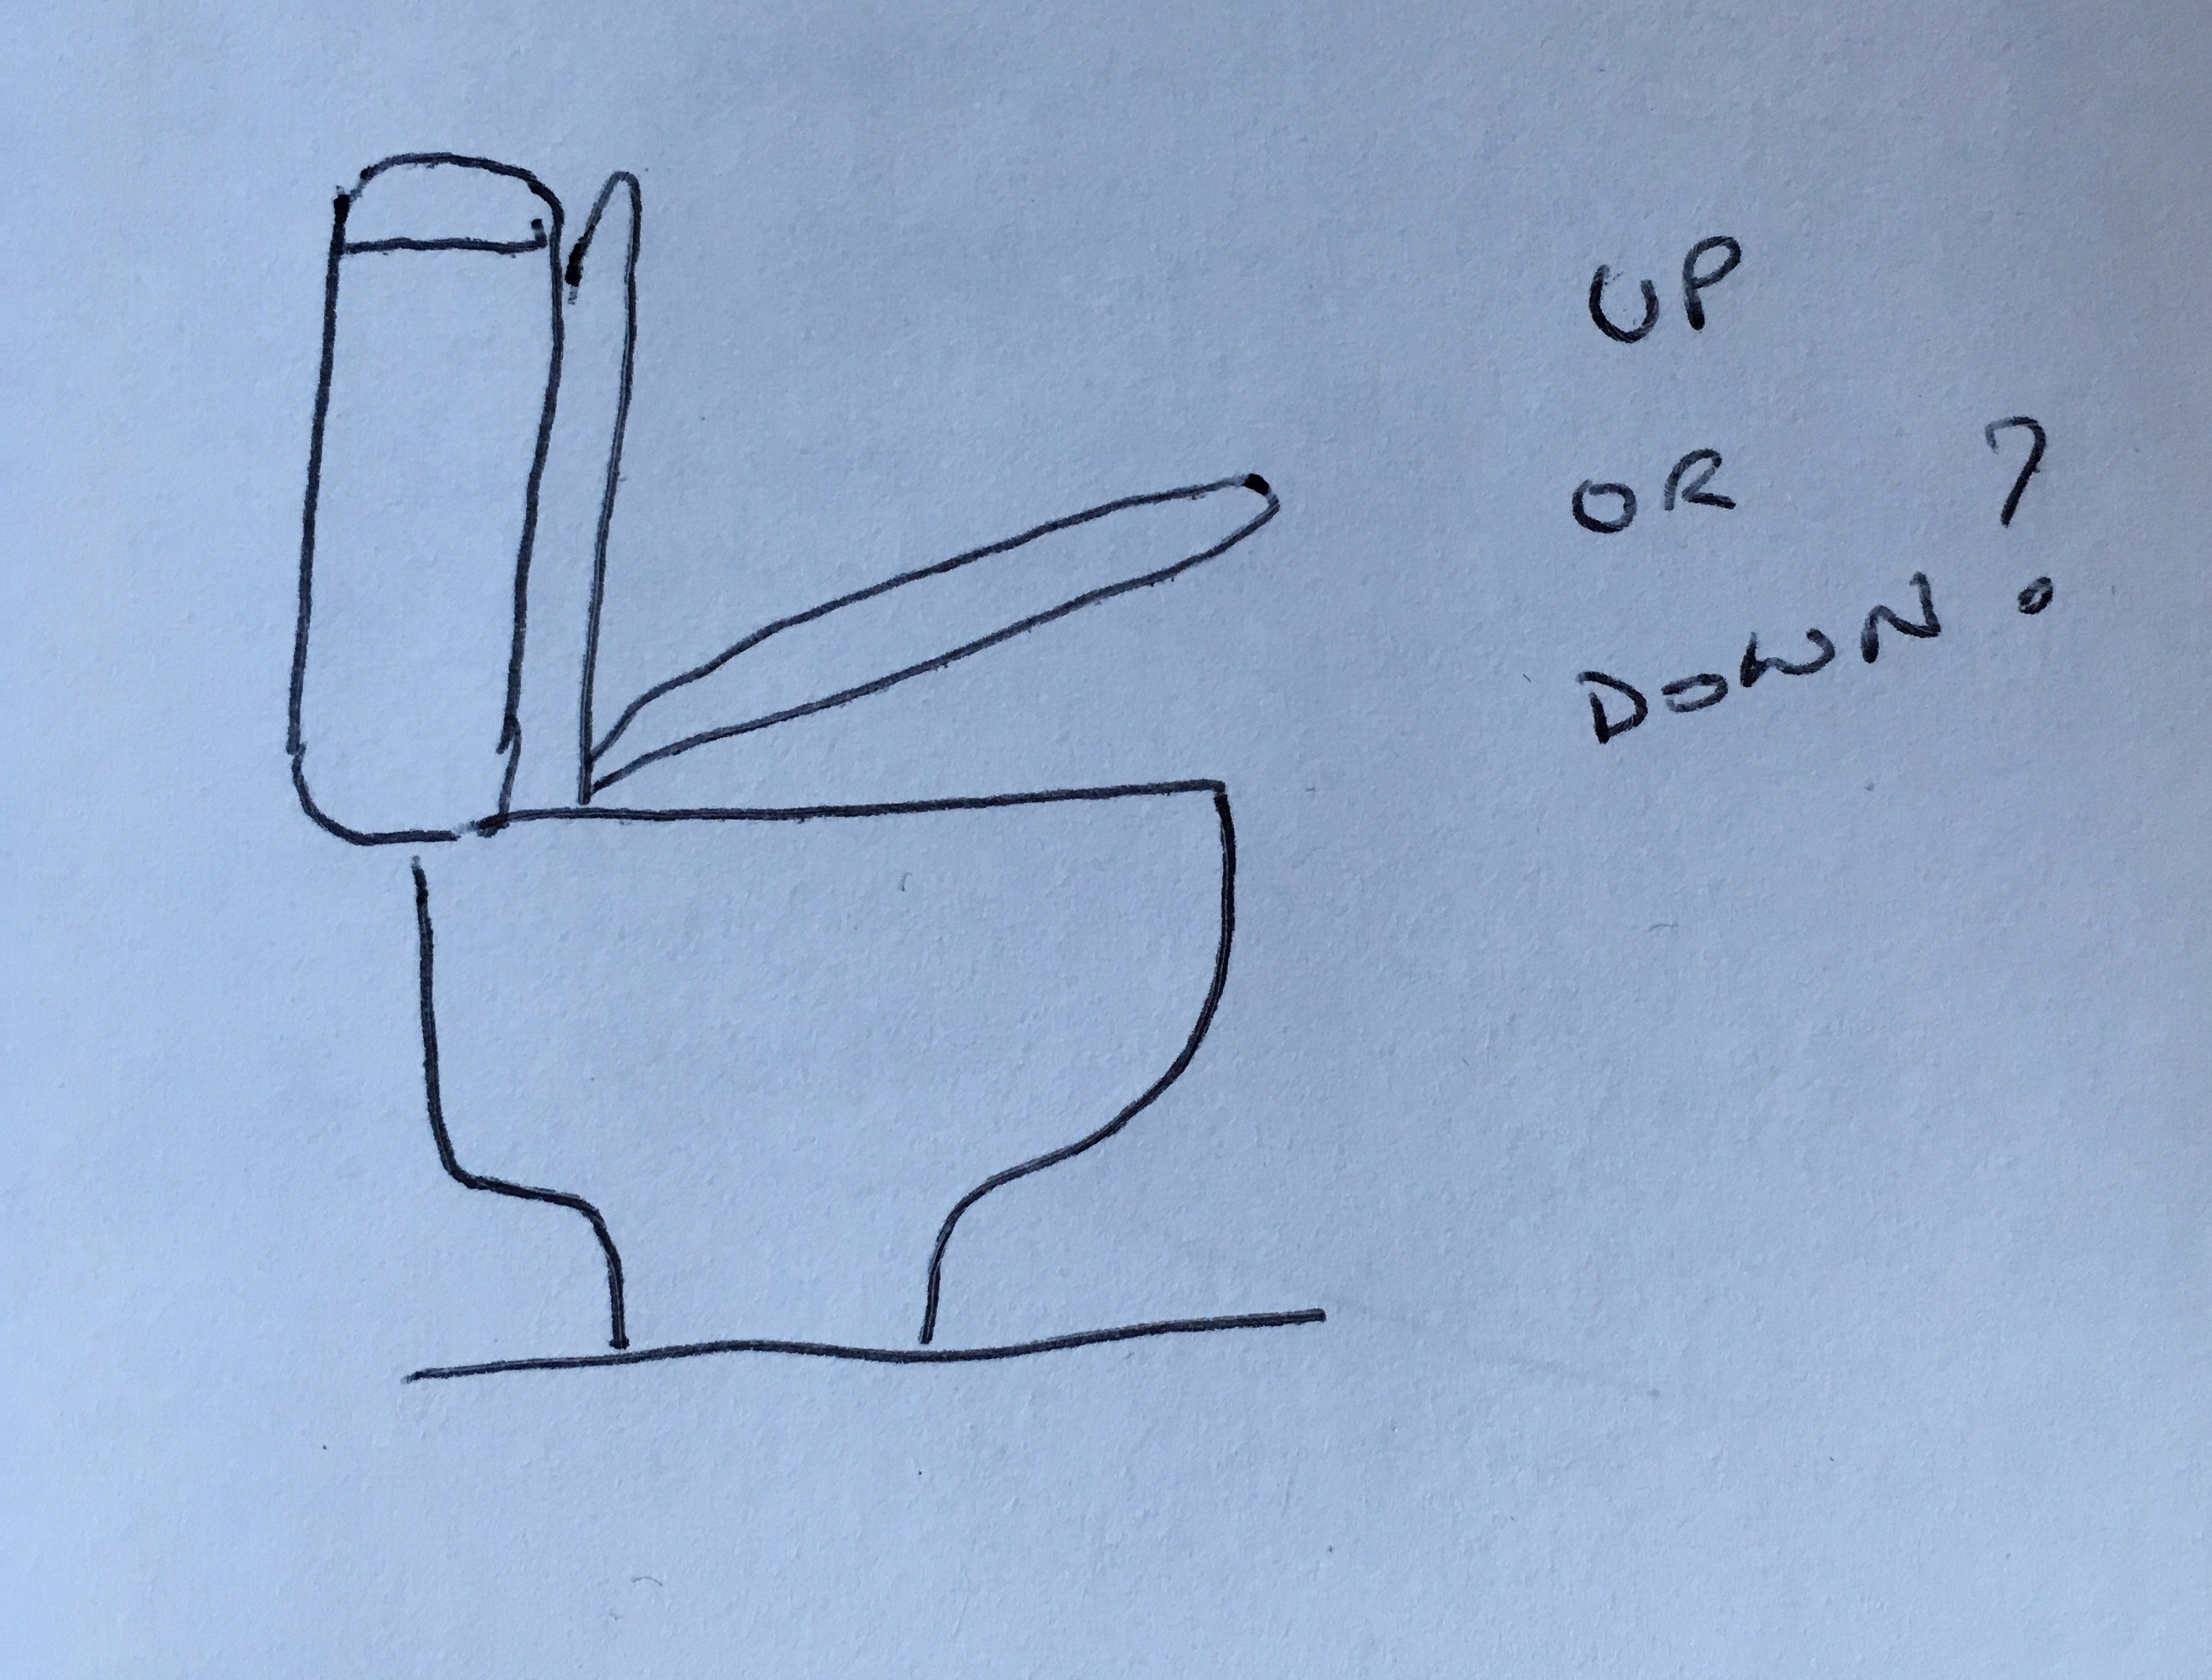 Image of a toilet with seat half way up/down